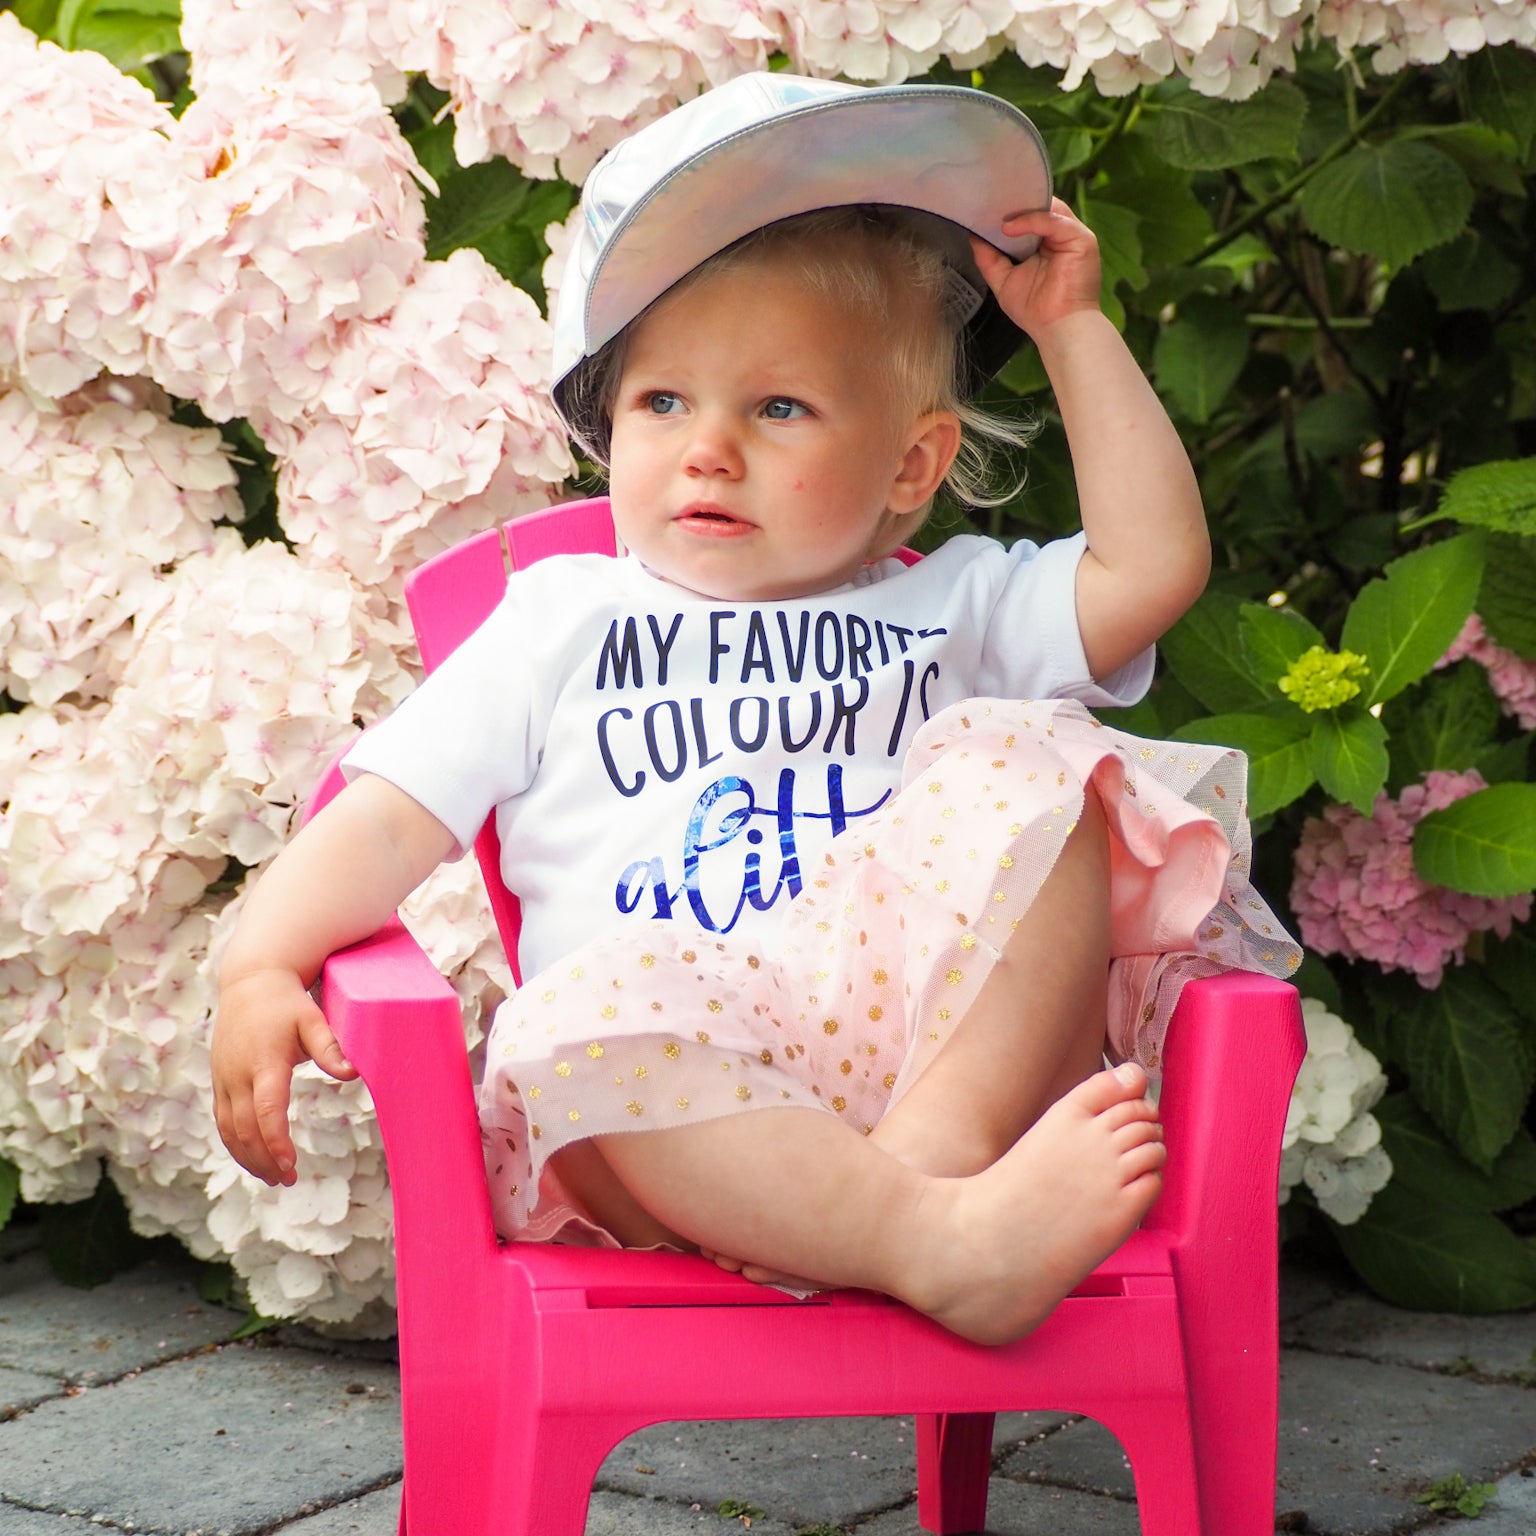 'My favorite colour is glitter' baby shortsleeve shirt